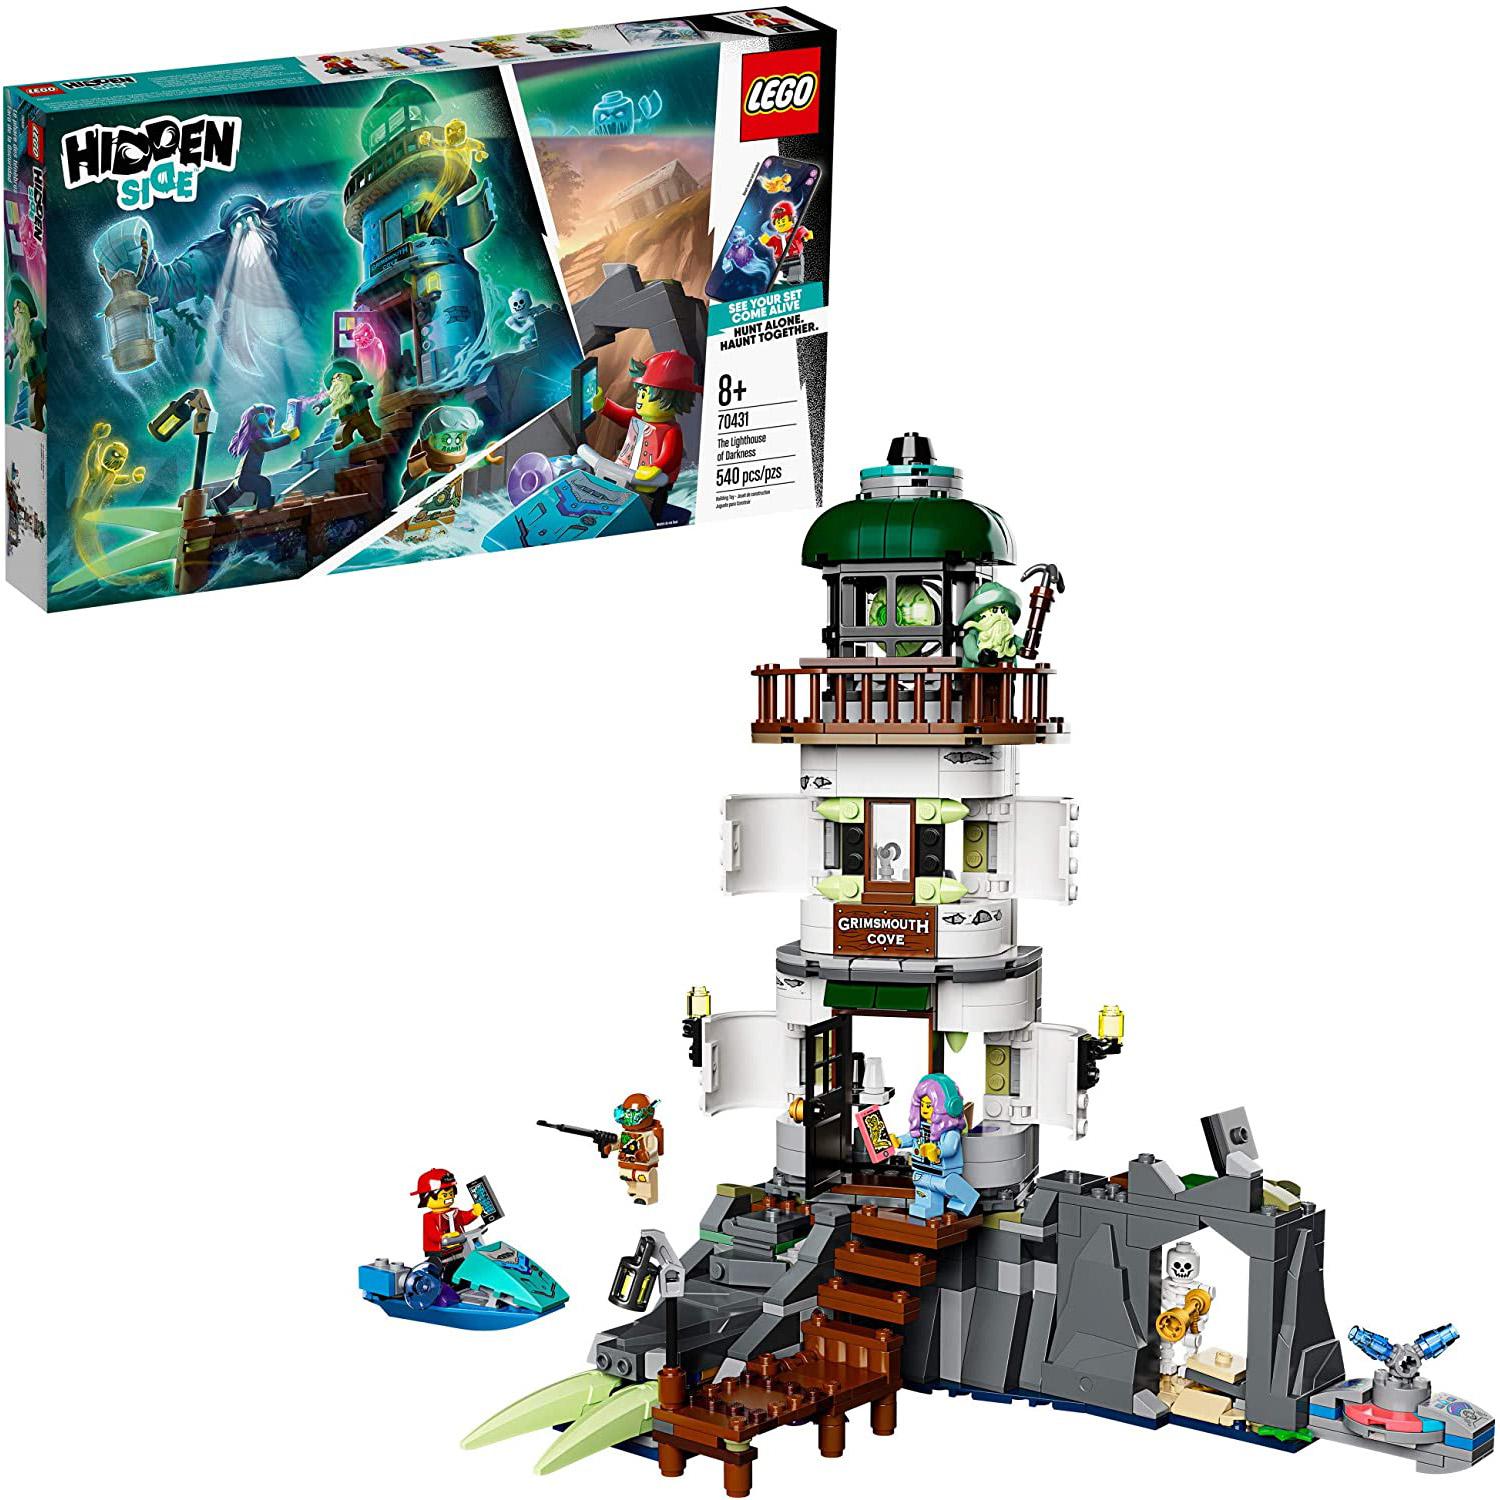 LEGO 540-Piece Hidden Side The Lighthouse of Darkness for $31.49 Shipped